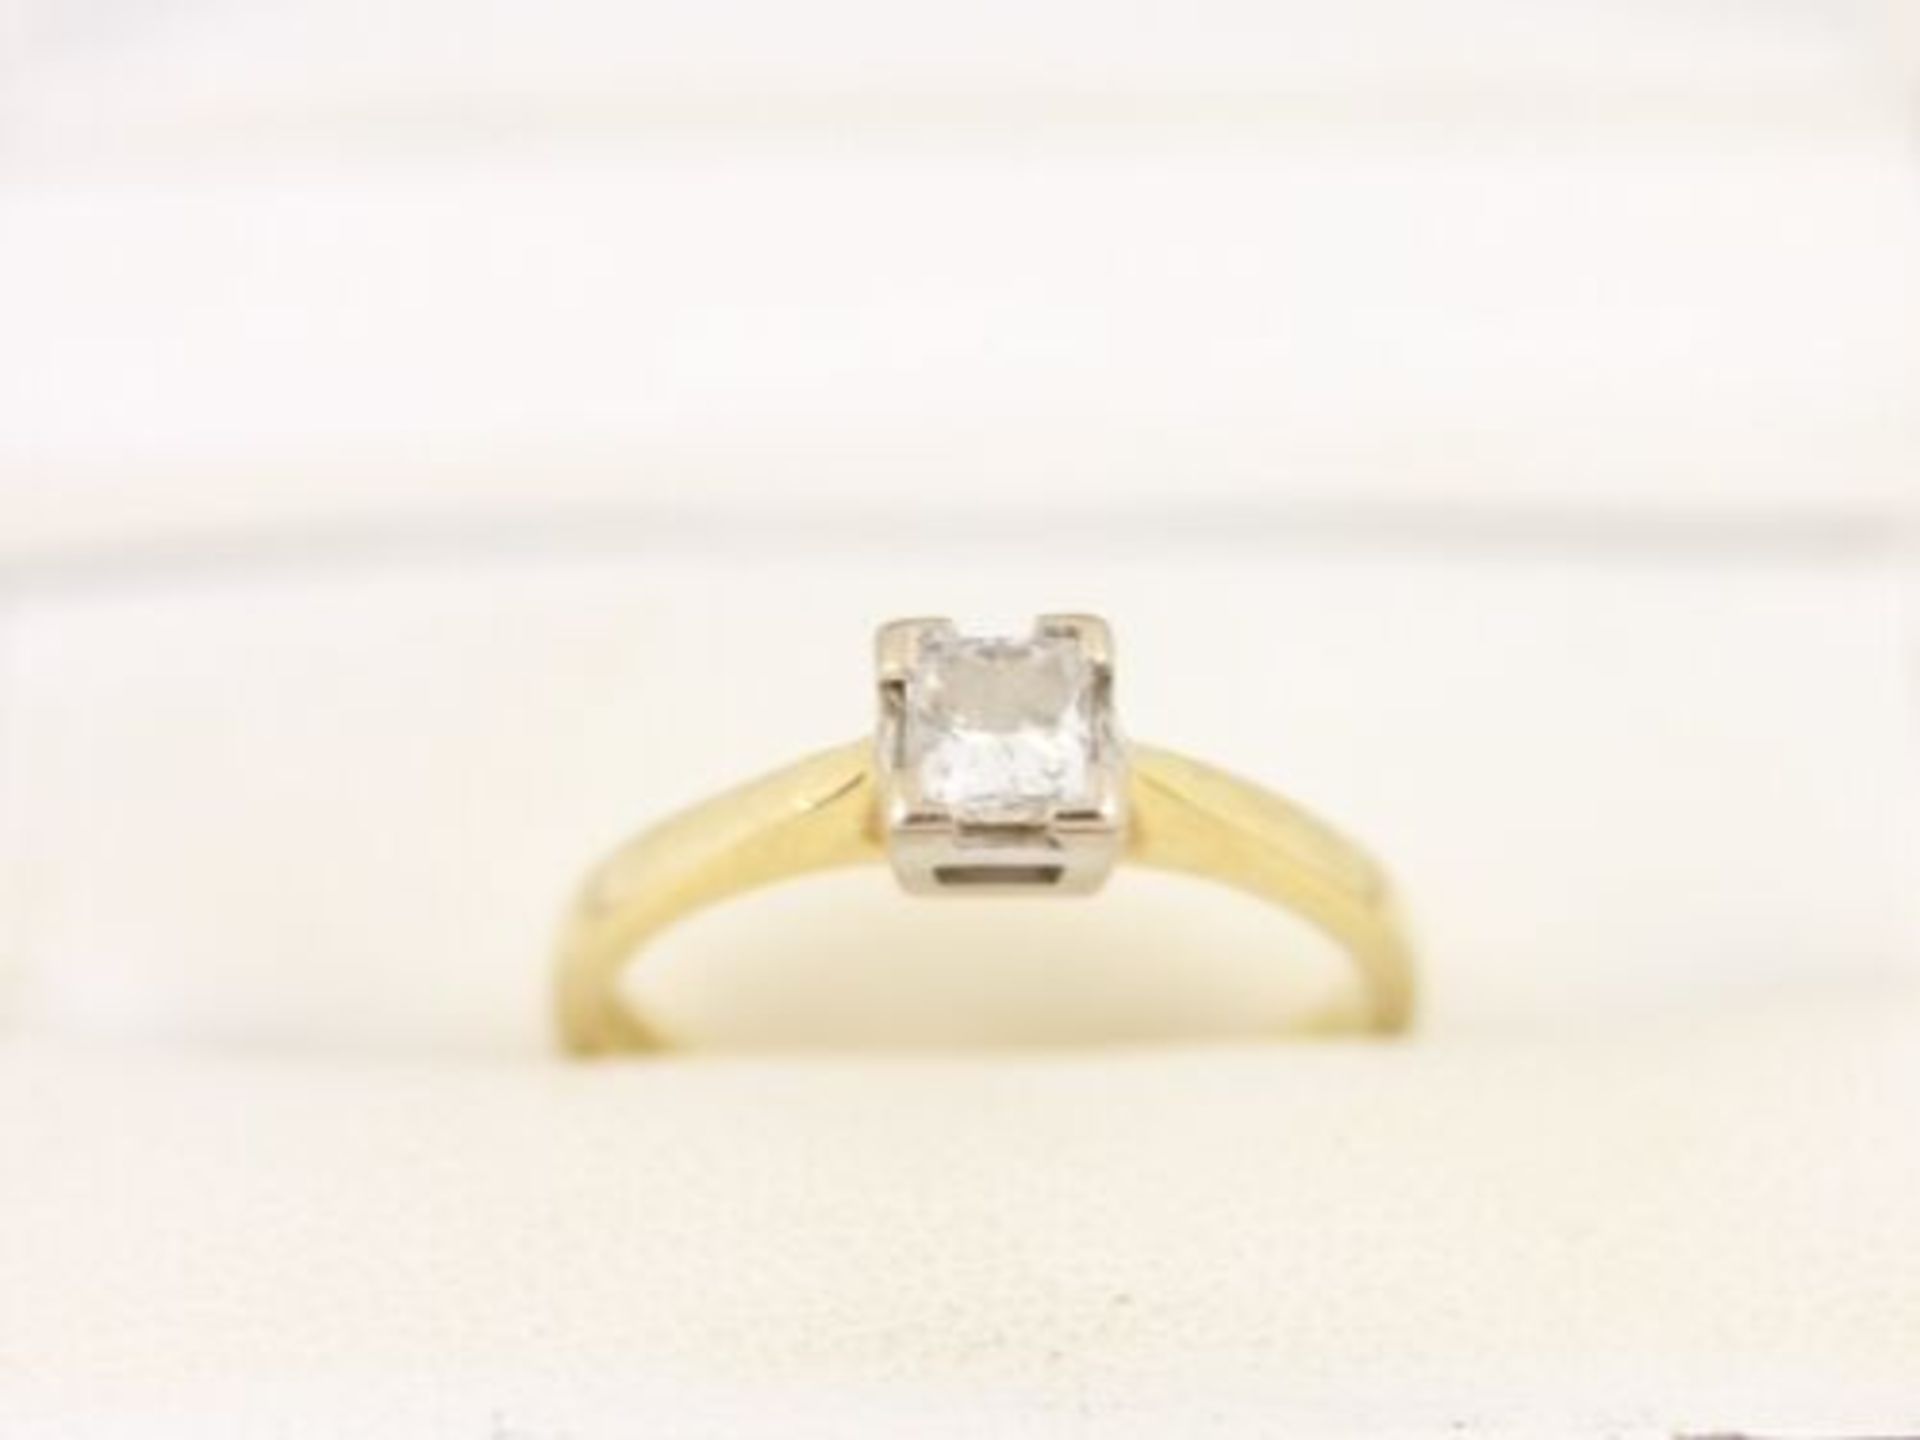 DIAMOND SOLITAIRE RING 18CT GOLD LADIES SIZE J 1/2 750 2.8G